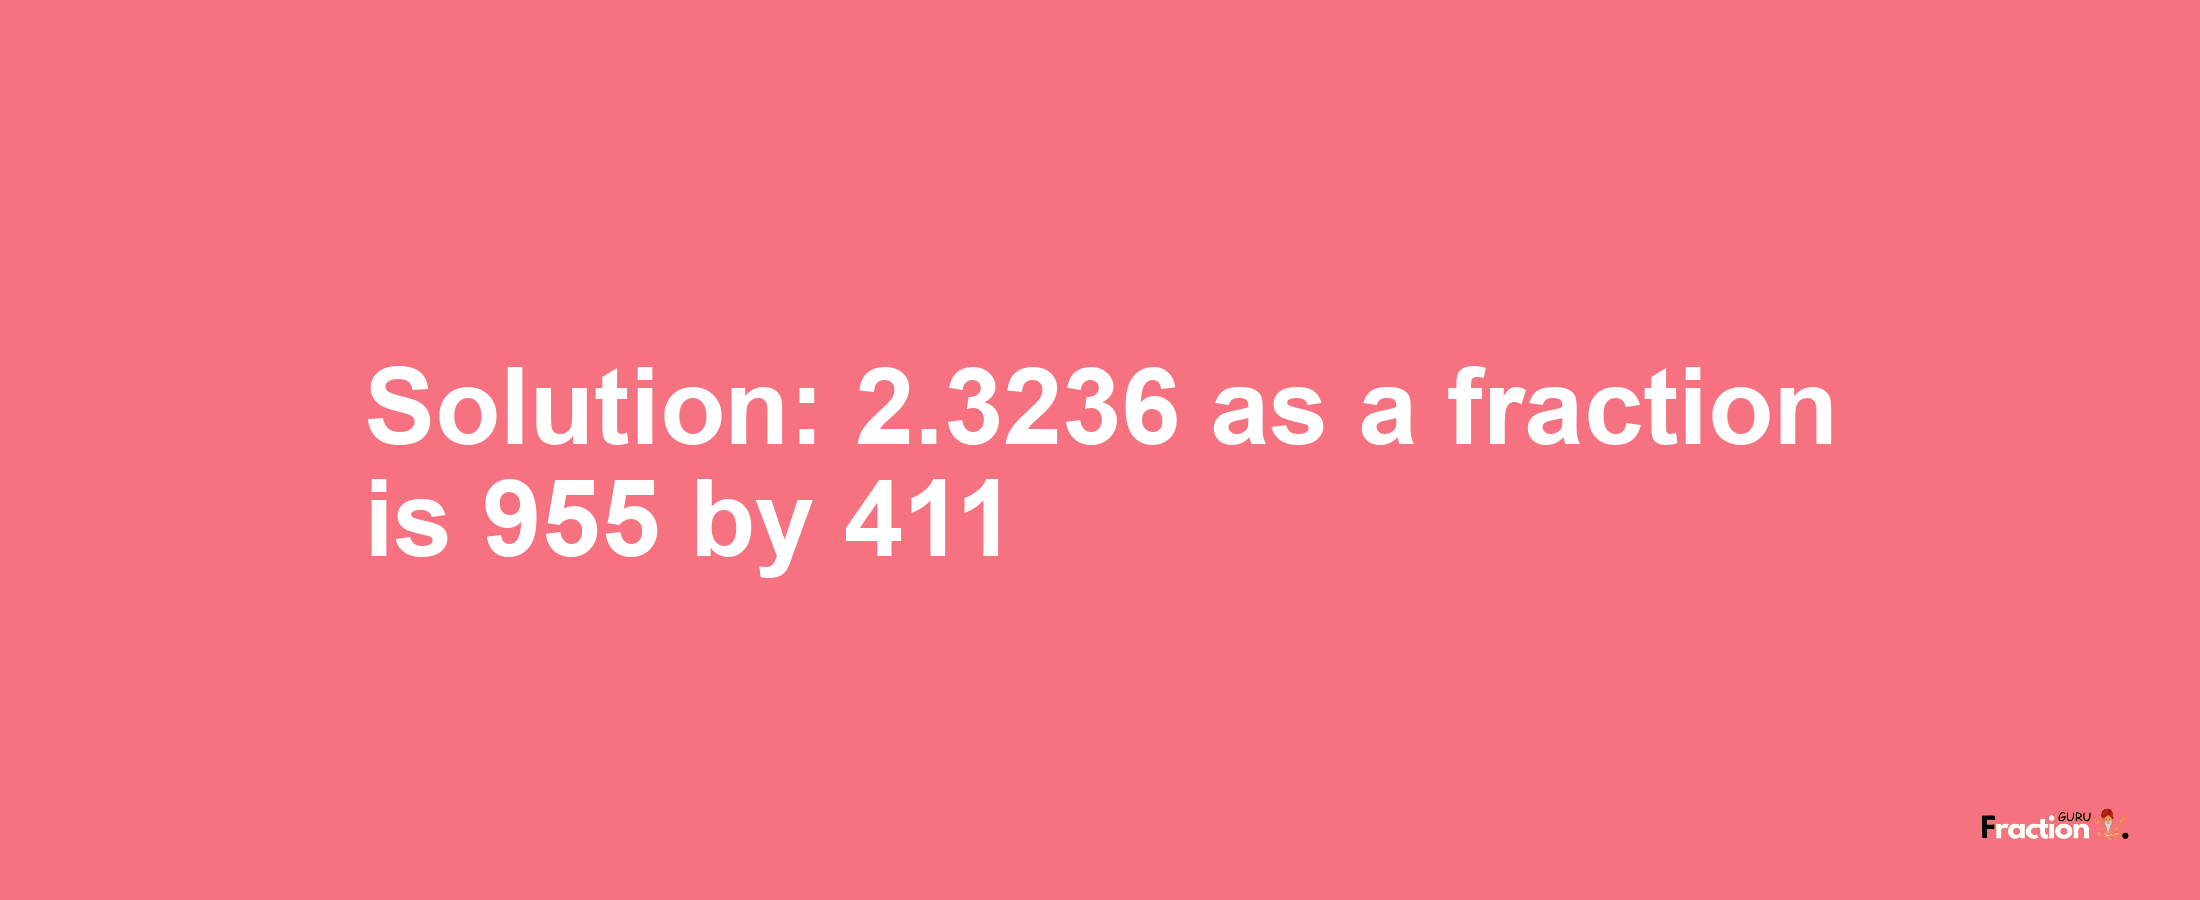 Solution:2.3236 as a fraction is 955/411